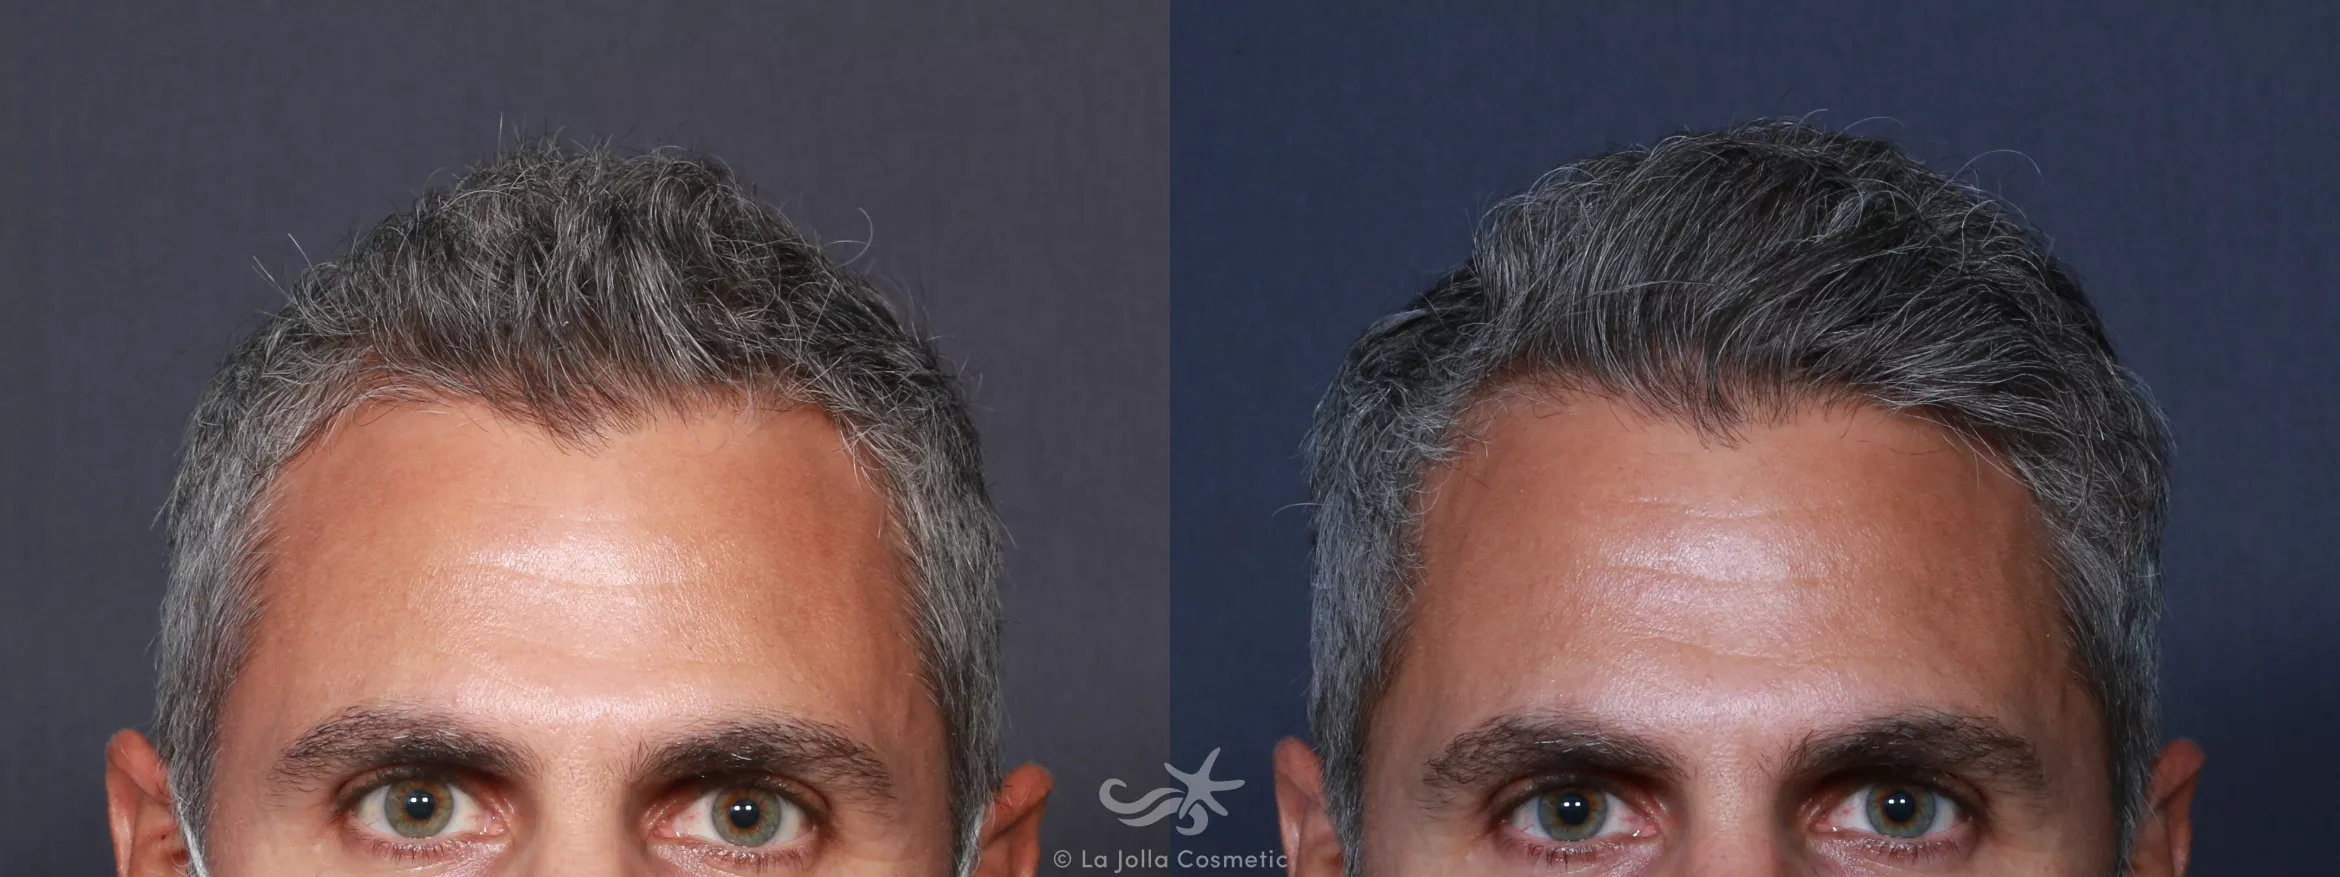 Before & After Hair Restoration Result 18 Front View in San Diego, CA